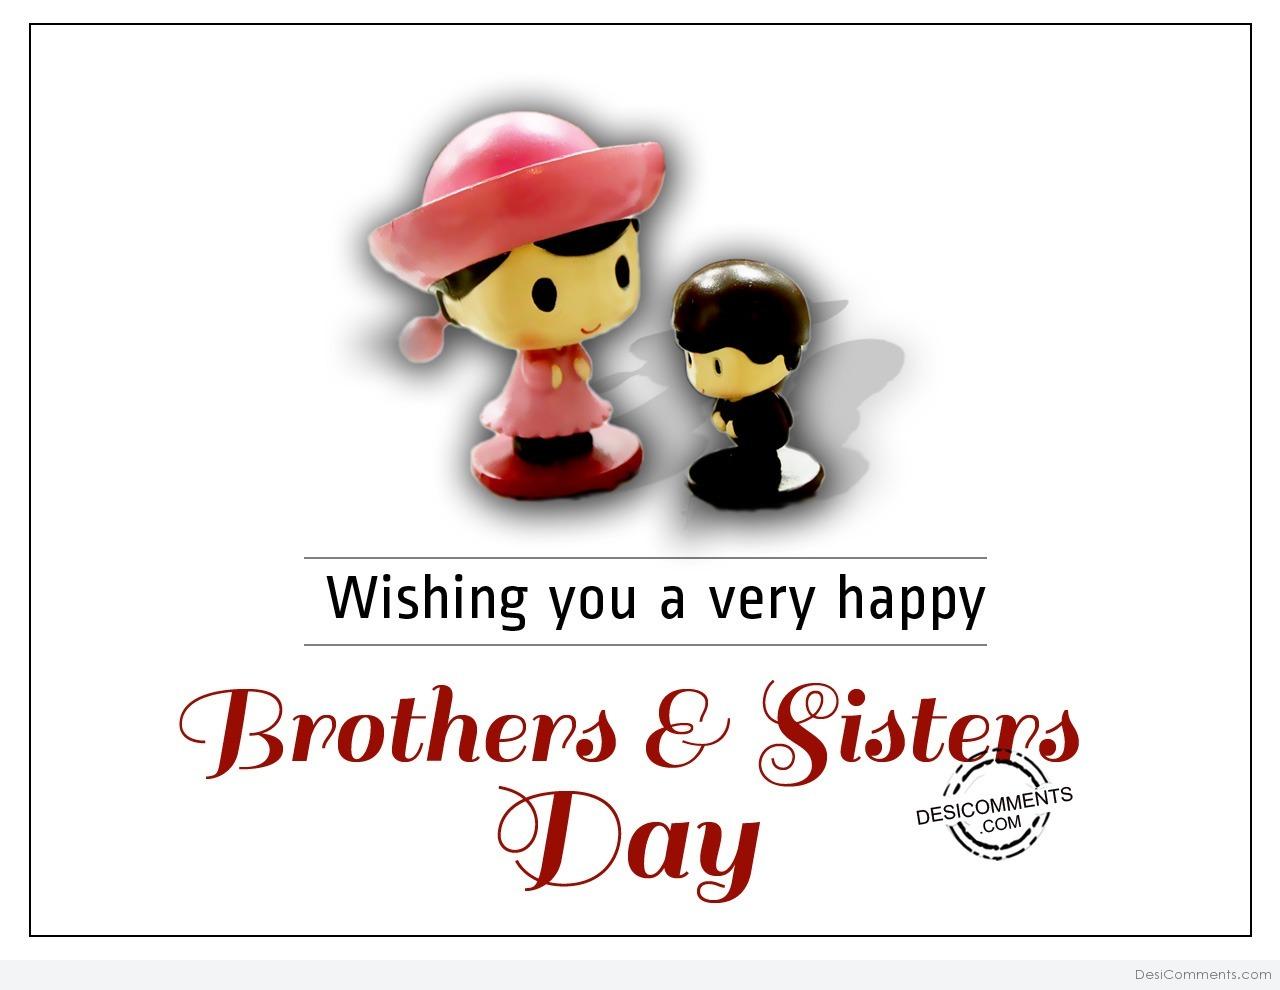 Wishing you a happy brothers & sisters Day - DesiComments.com